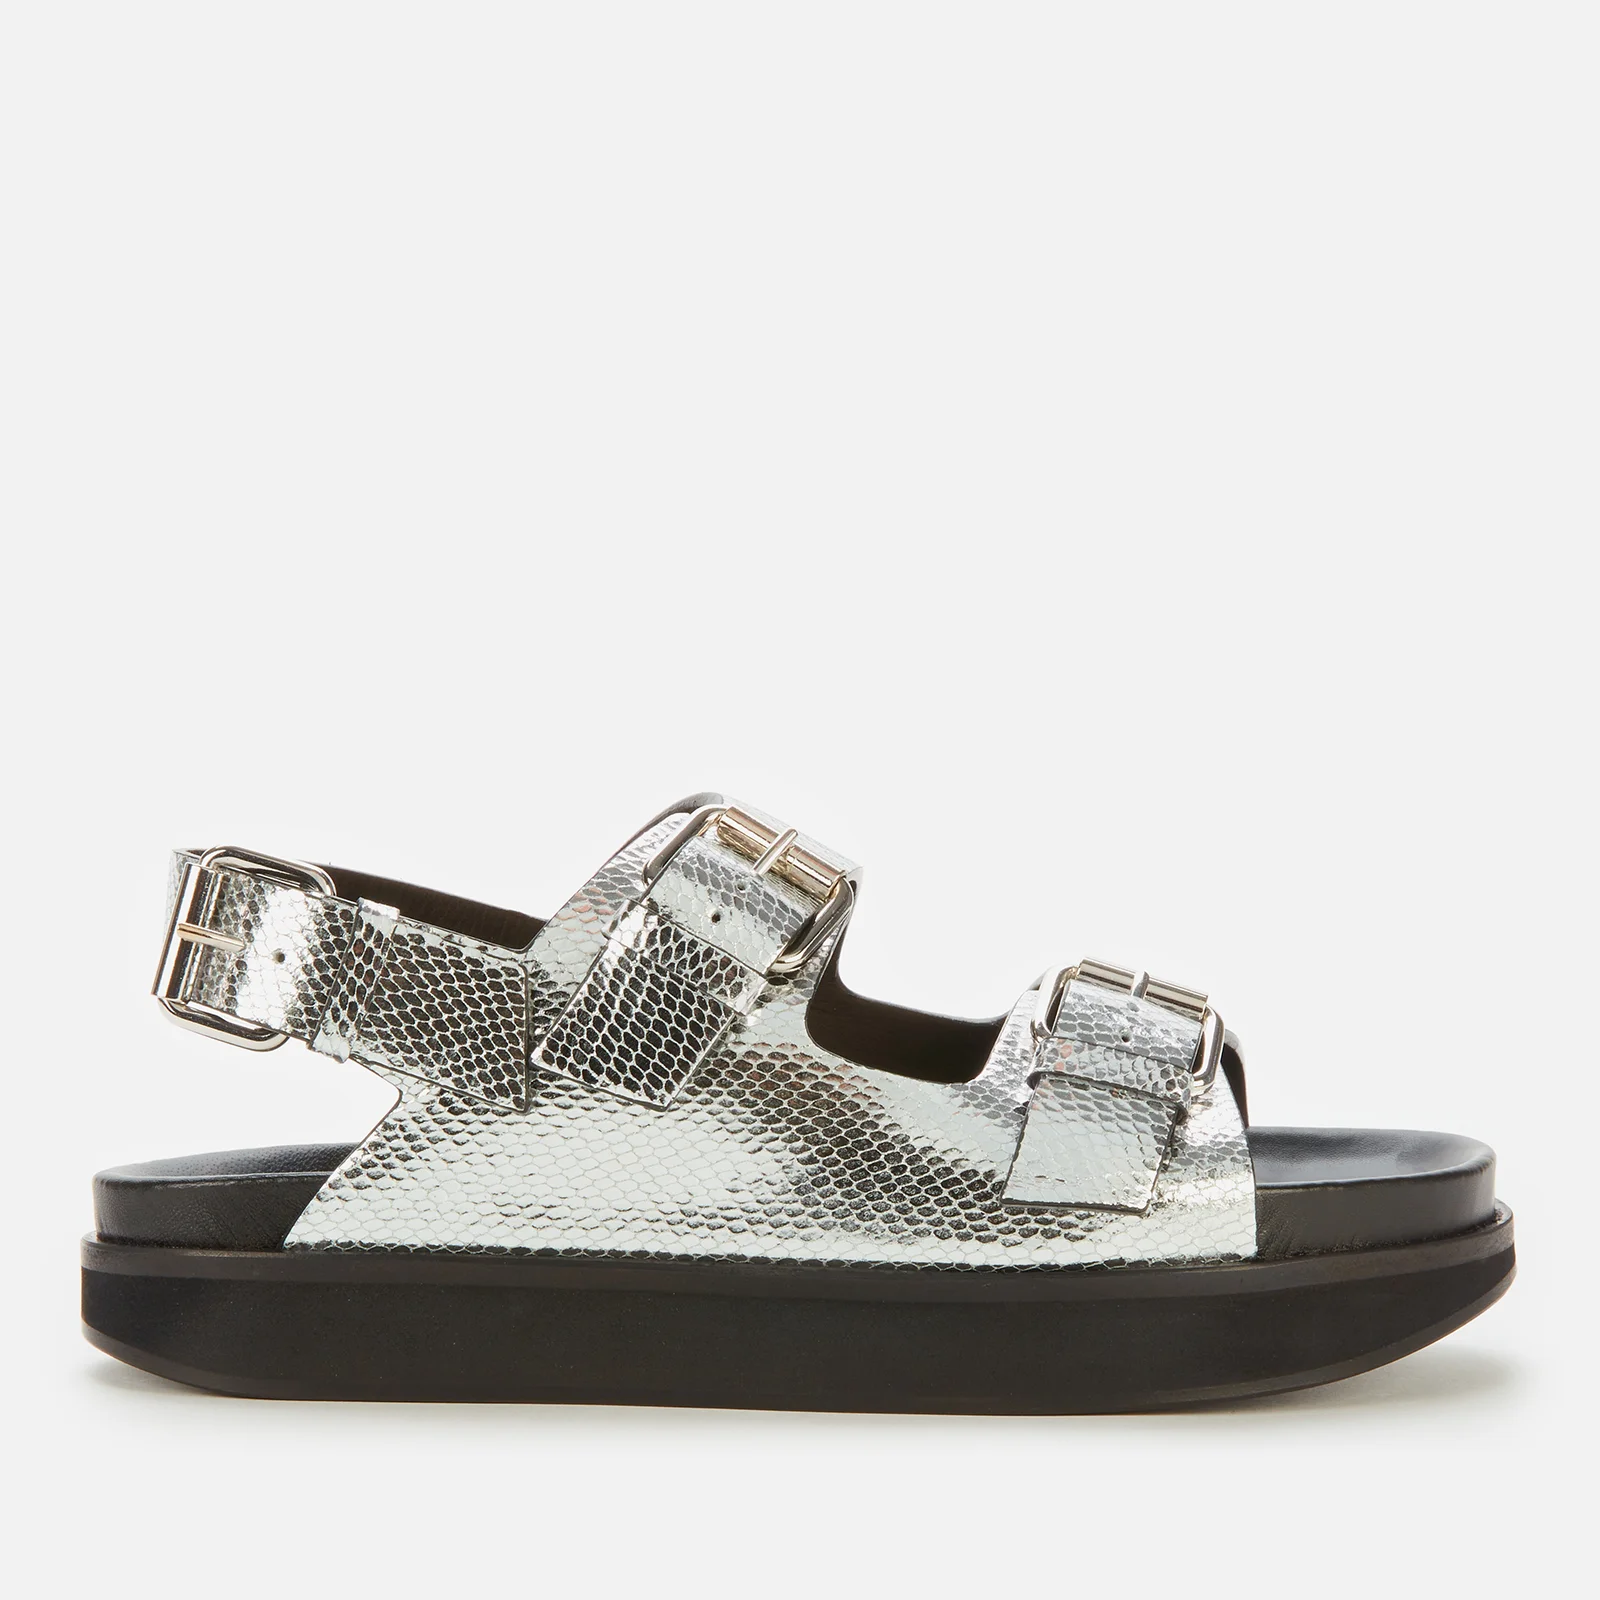 Isabel Marant Women's Ophie Metallic Leather Double Strap Sandals - Silver Image 1